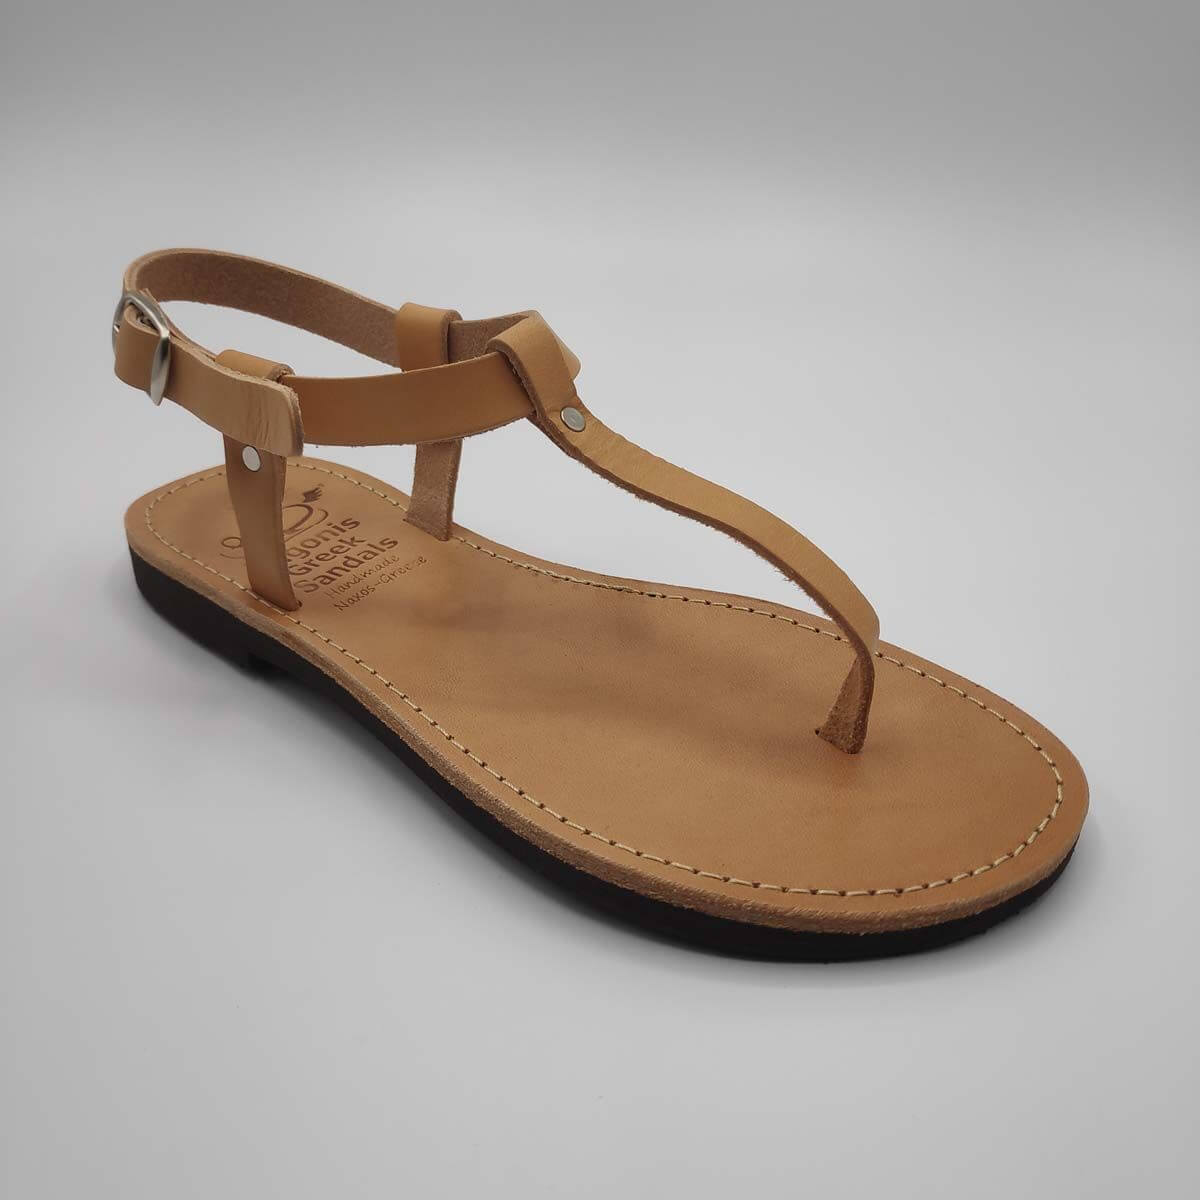 thong sandals with backstrap